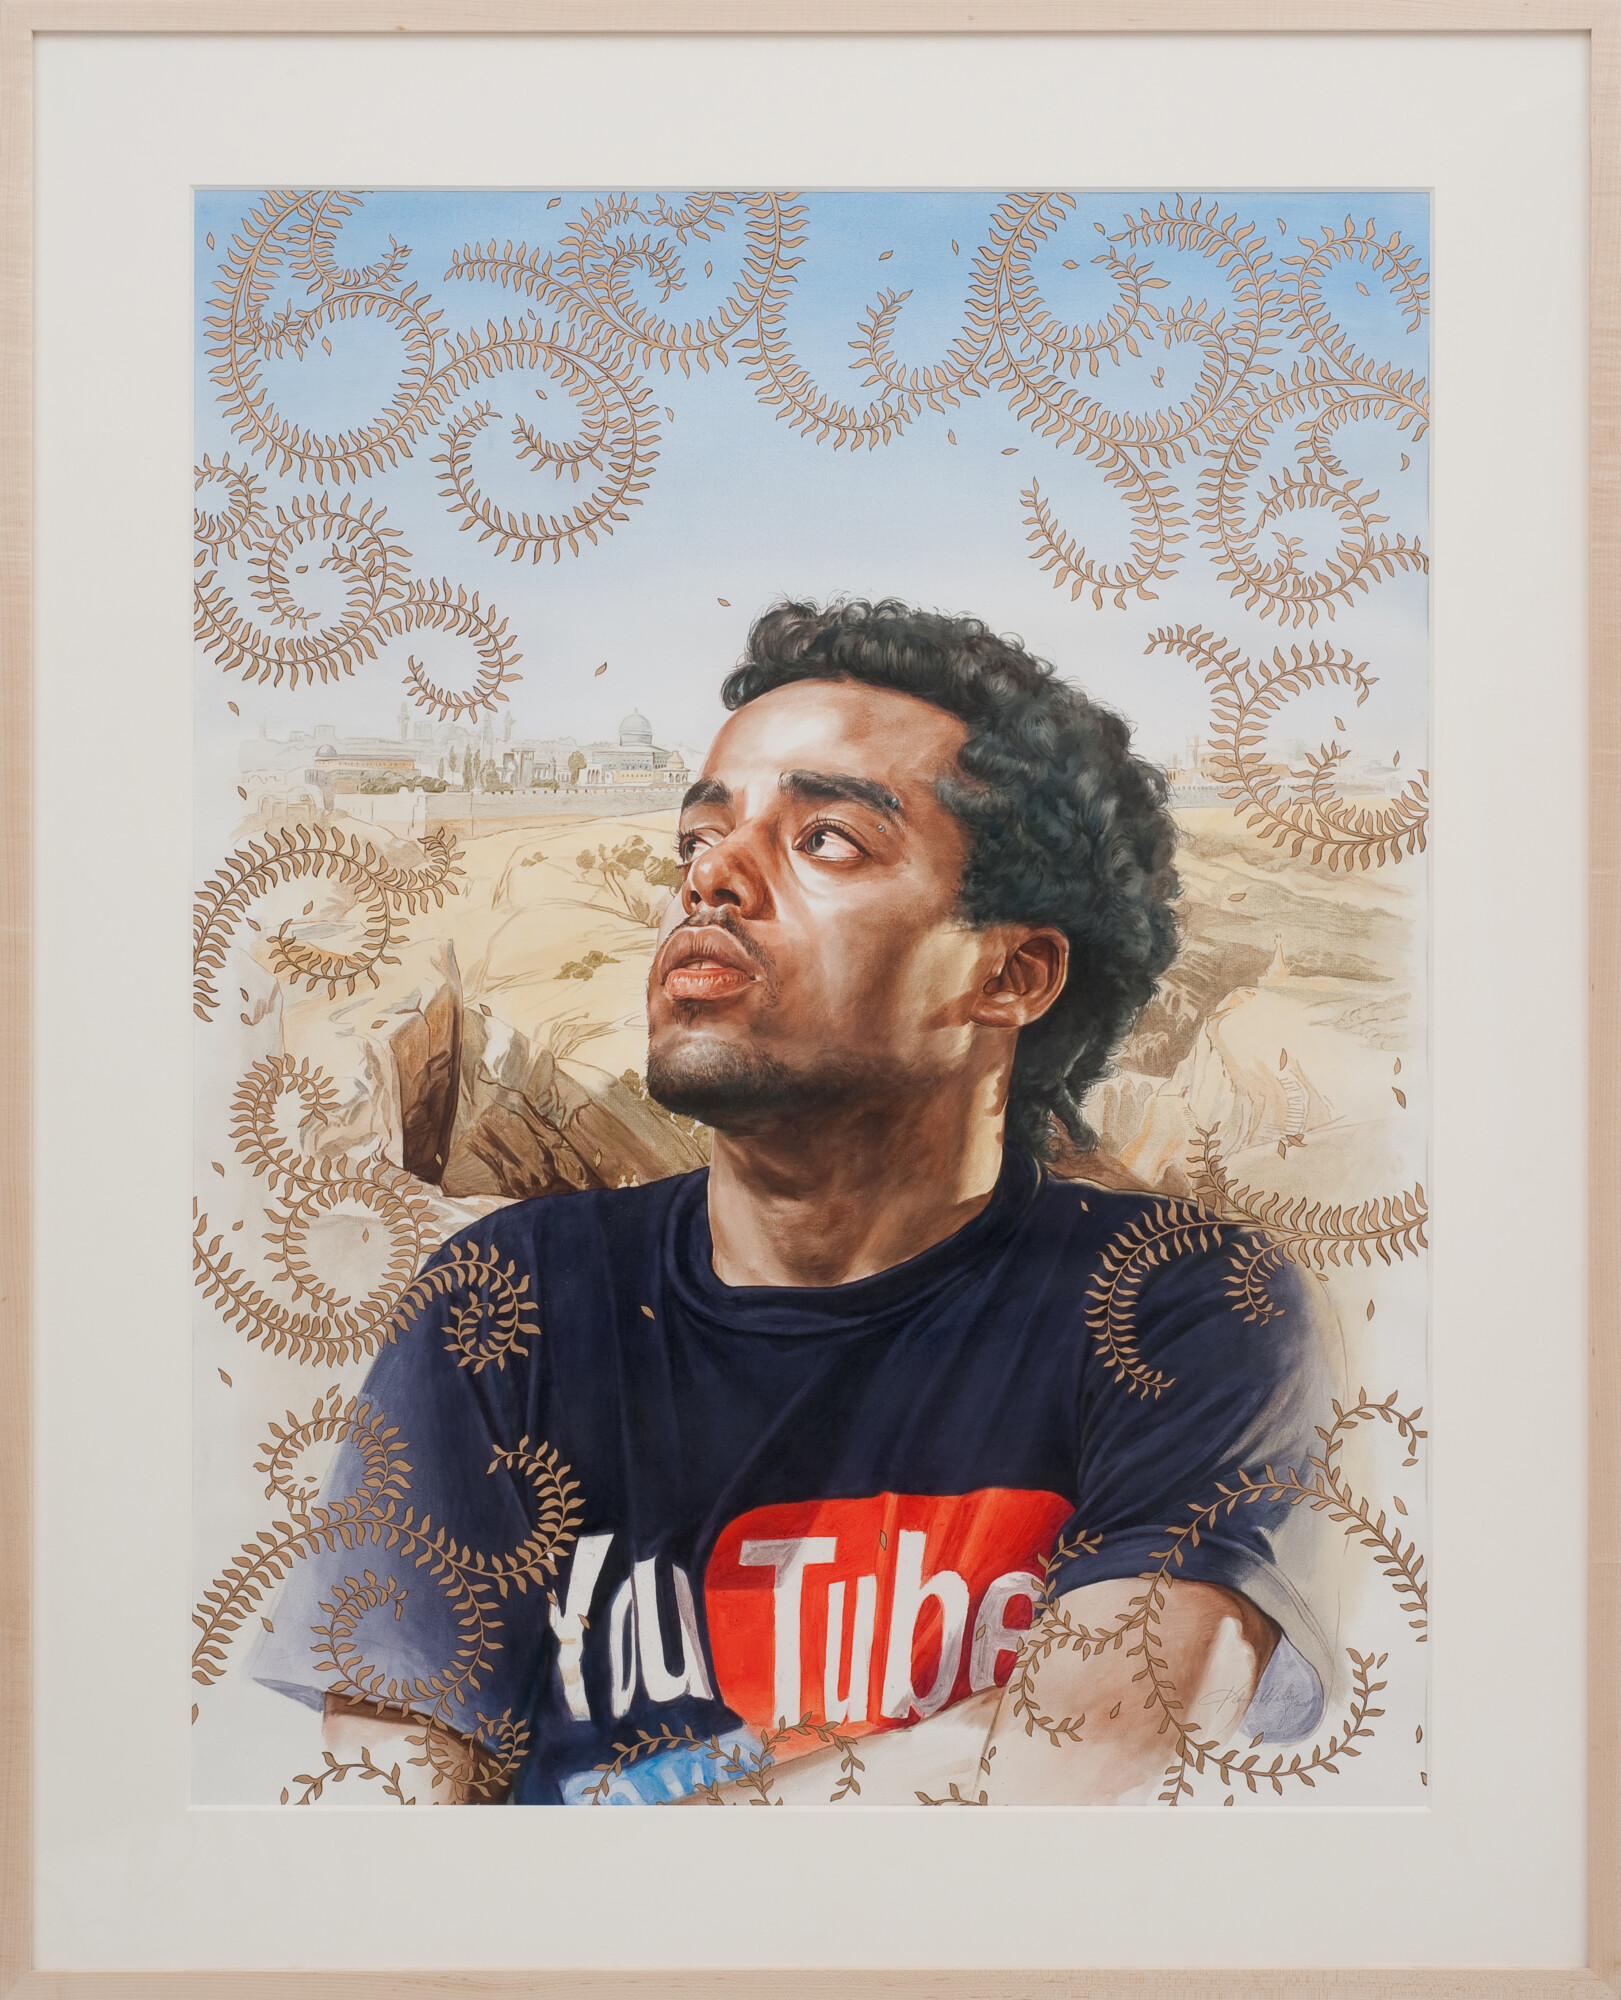 kehindewiley_the world stage israel_Mukat Brhan Study